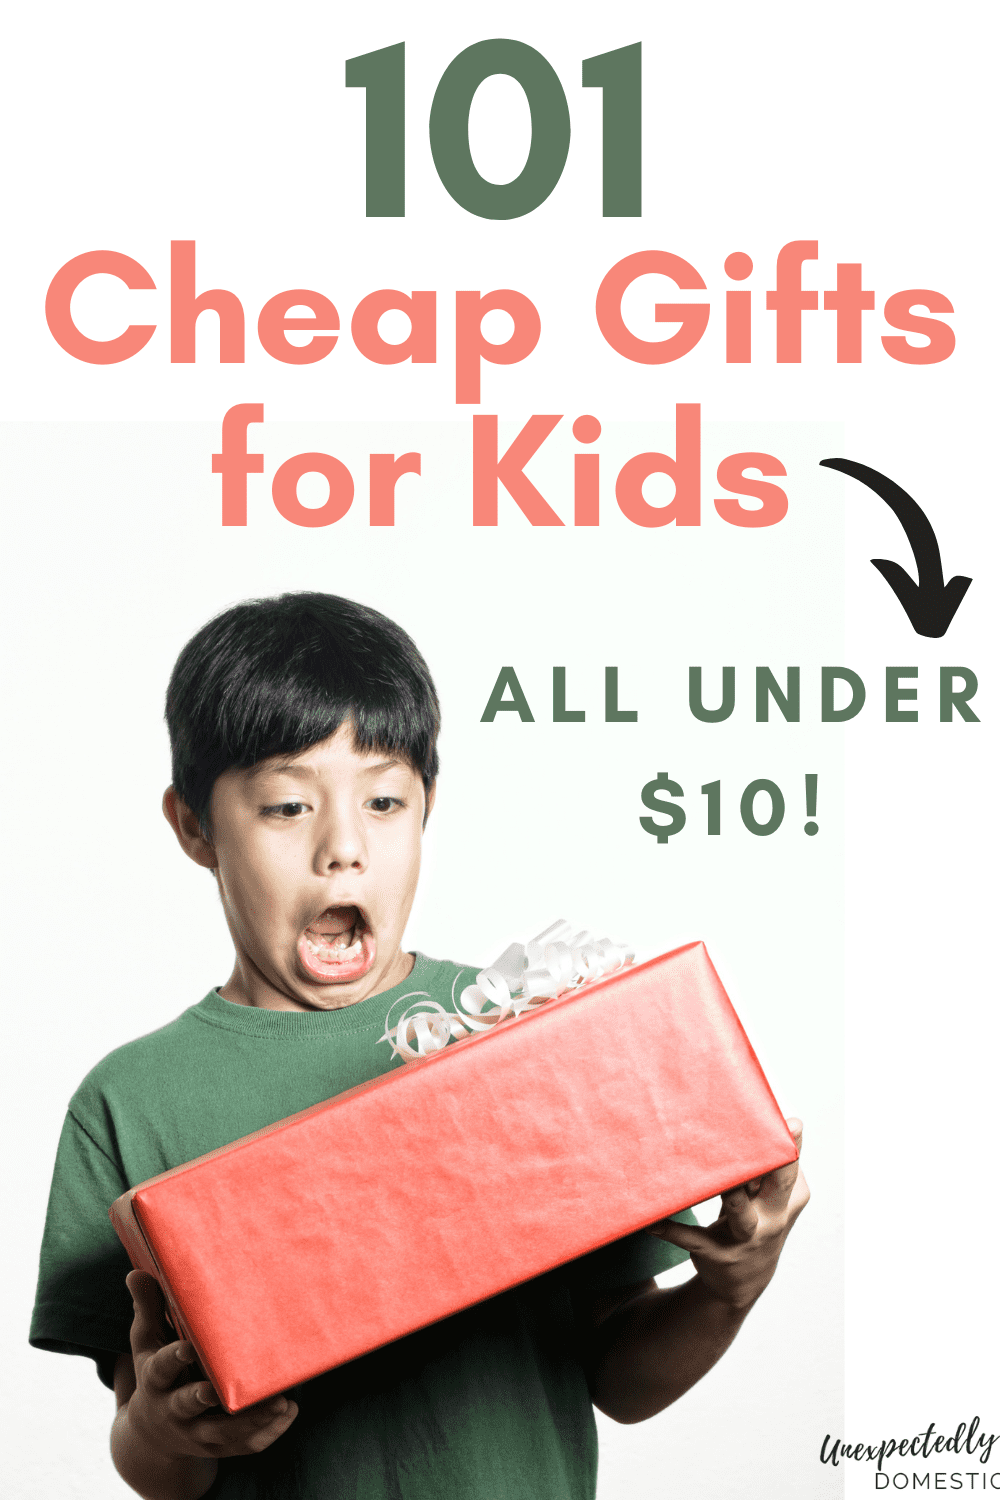 50 Gifts For Kids Under $10 (that kids will love!) - Money tips